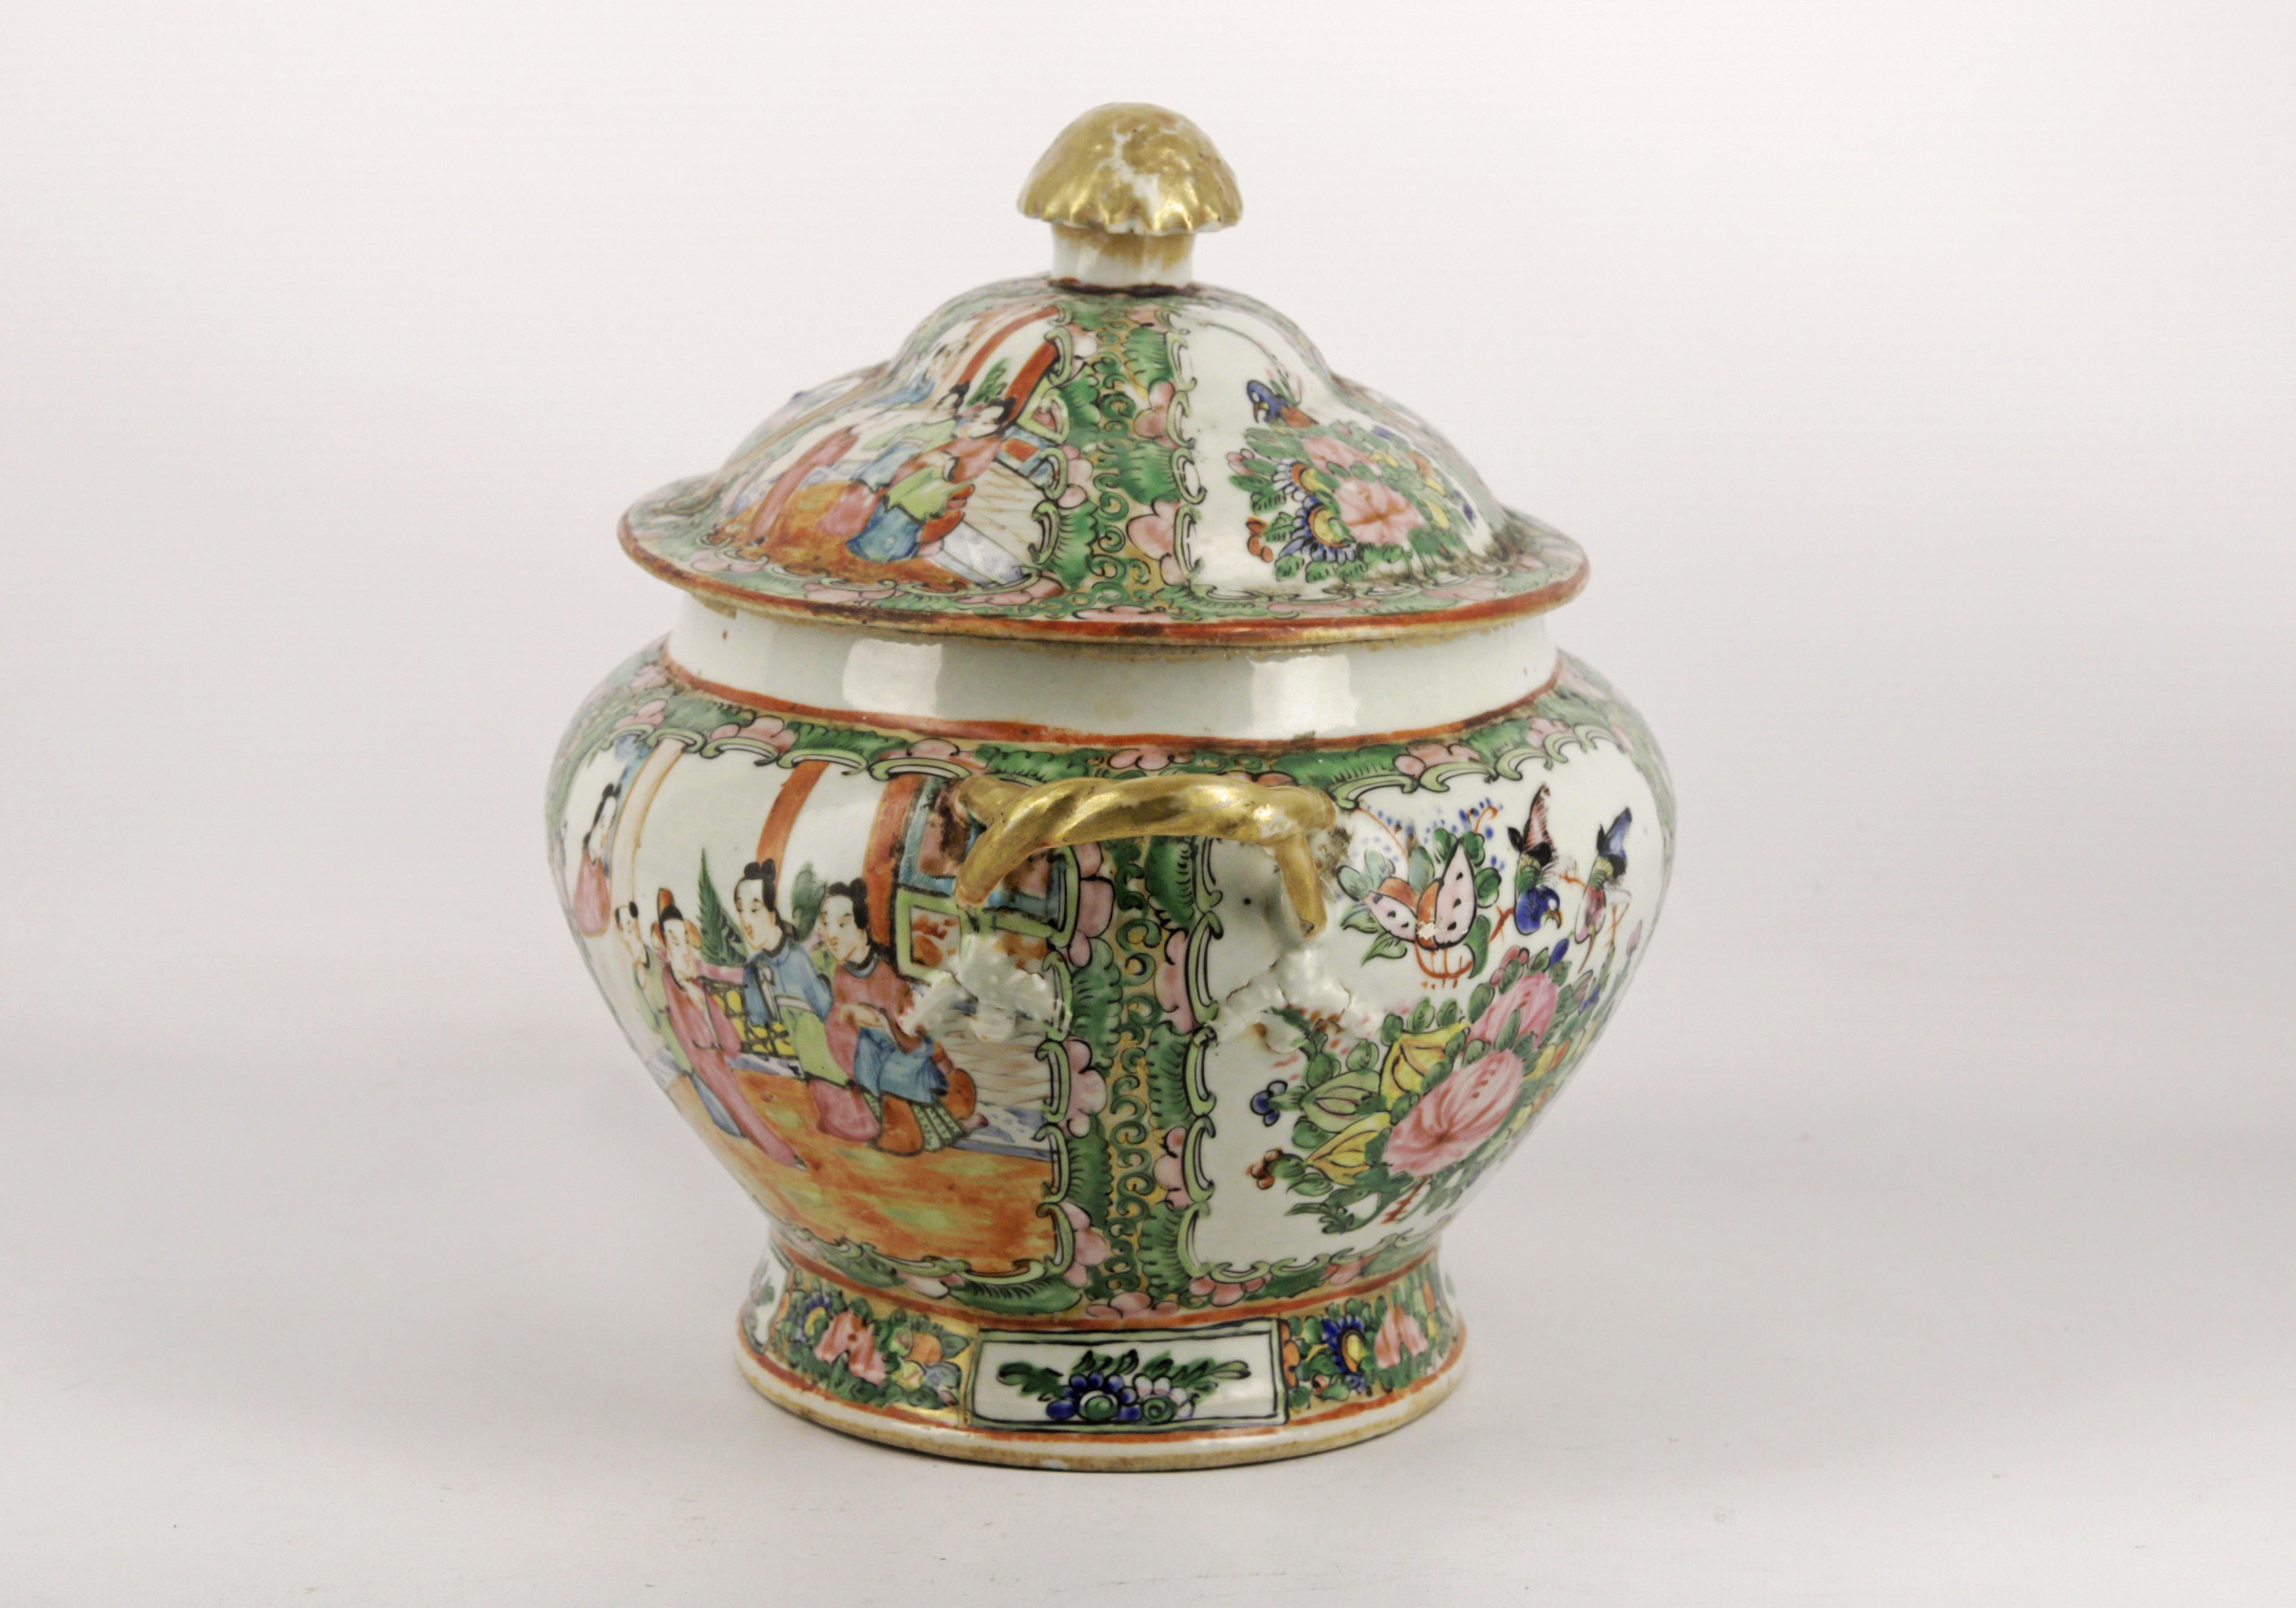 Chinese export tureen
Porcelain Material and hand painted
Bronze frame and golden details
Origin China circa 1900
Excellent condition, natural wear
Chinese export porcelain includes a wide range of Chinese porcelain that was made (almost)